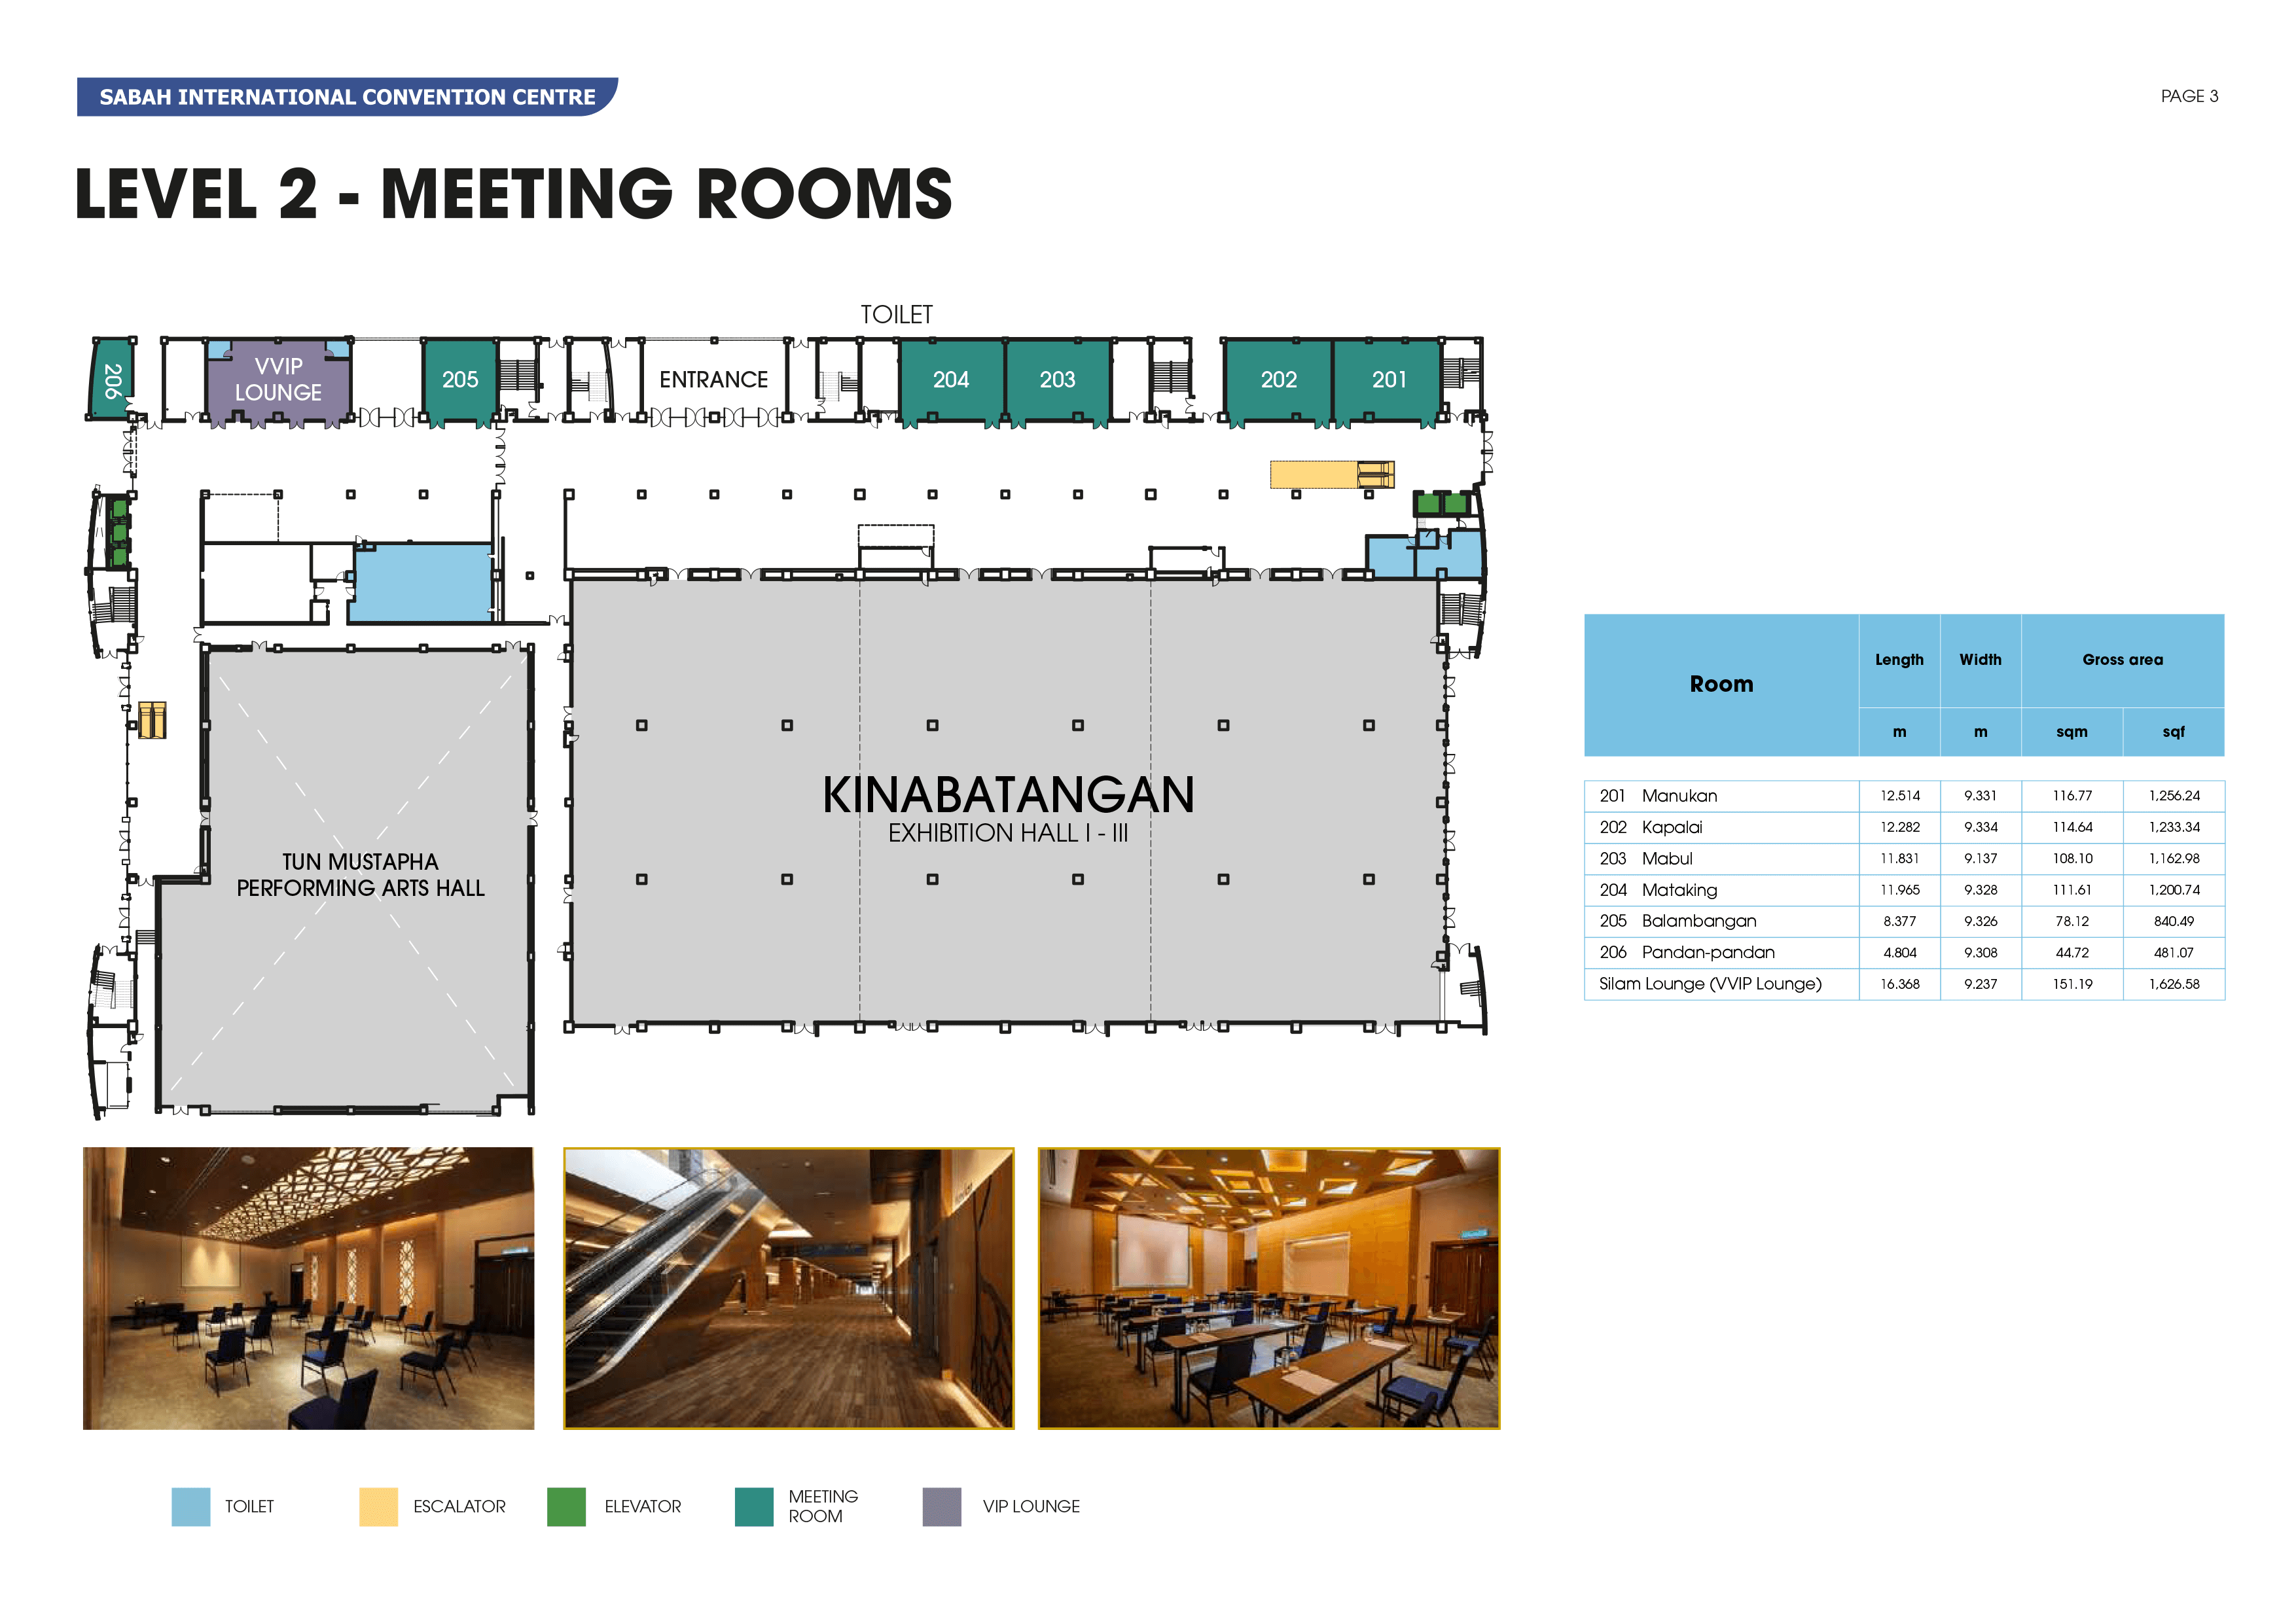 Level 2 - Meeting Rooms